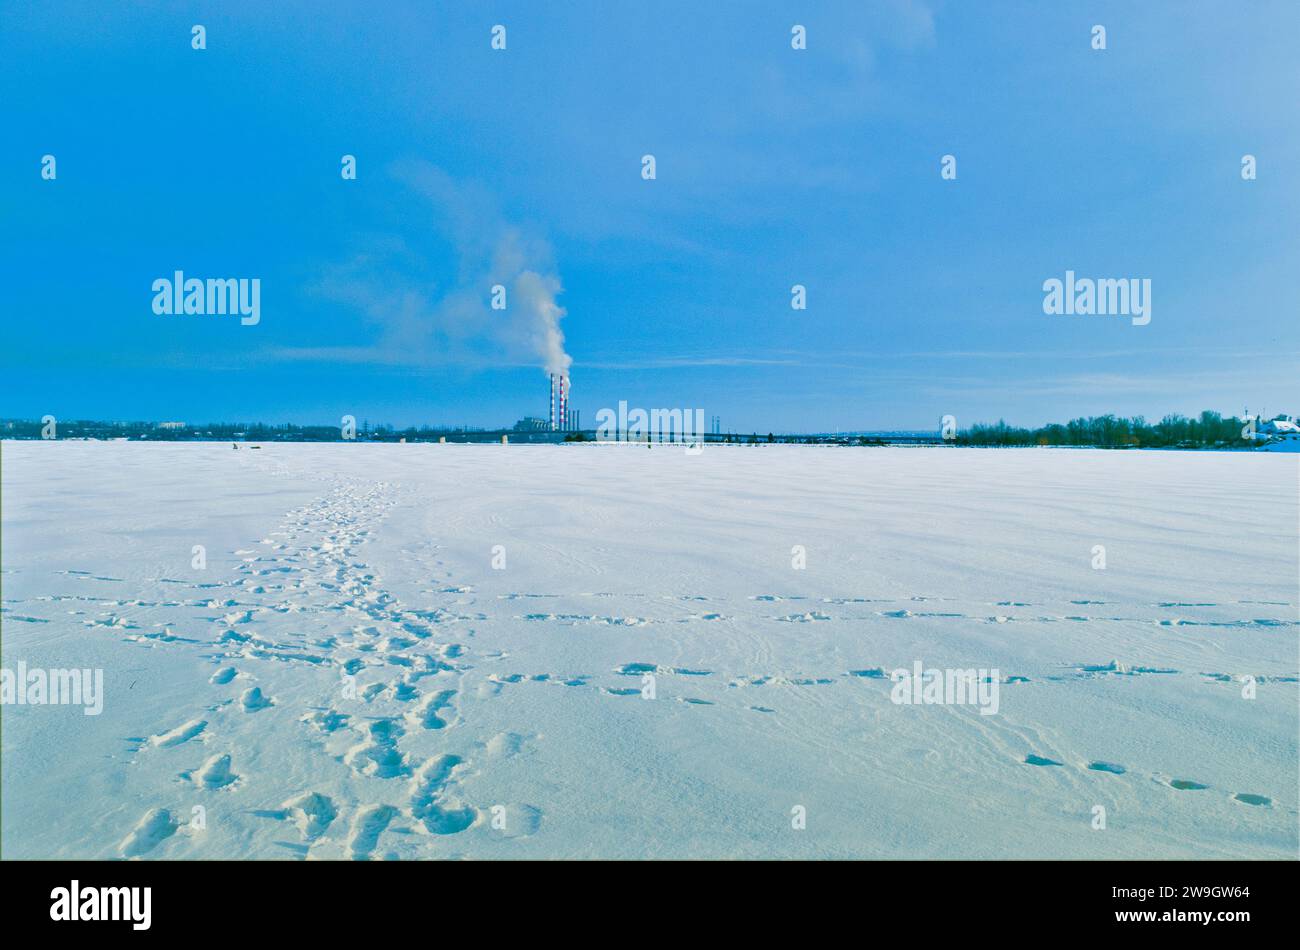 An old coal-fired power plant emission of toxic smoke into the atmosphere, industrial urban winter landscape with frozen river Stock Photo